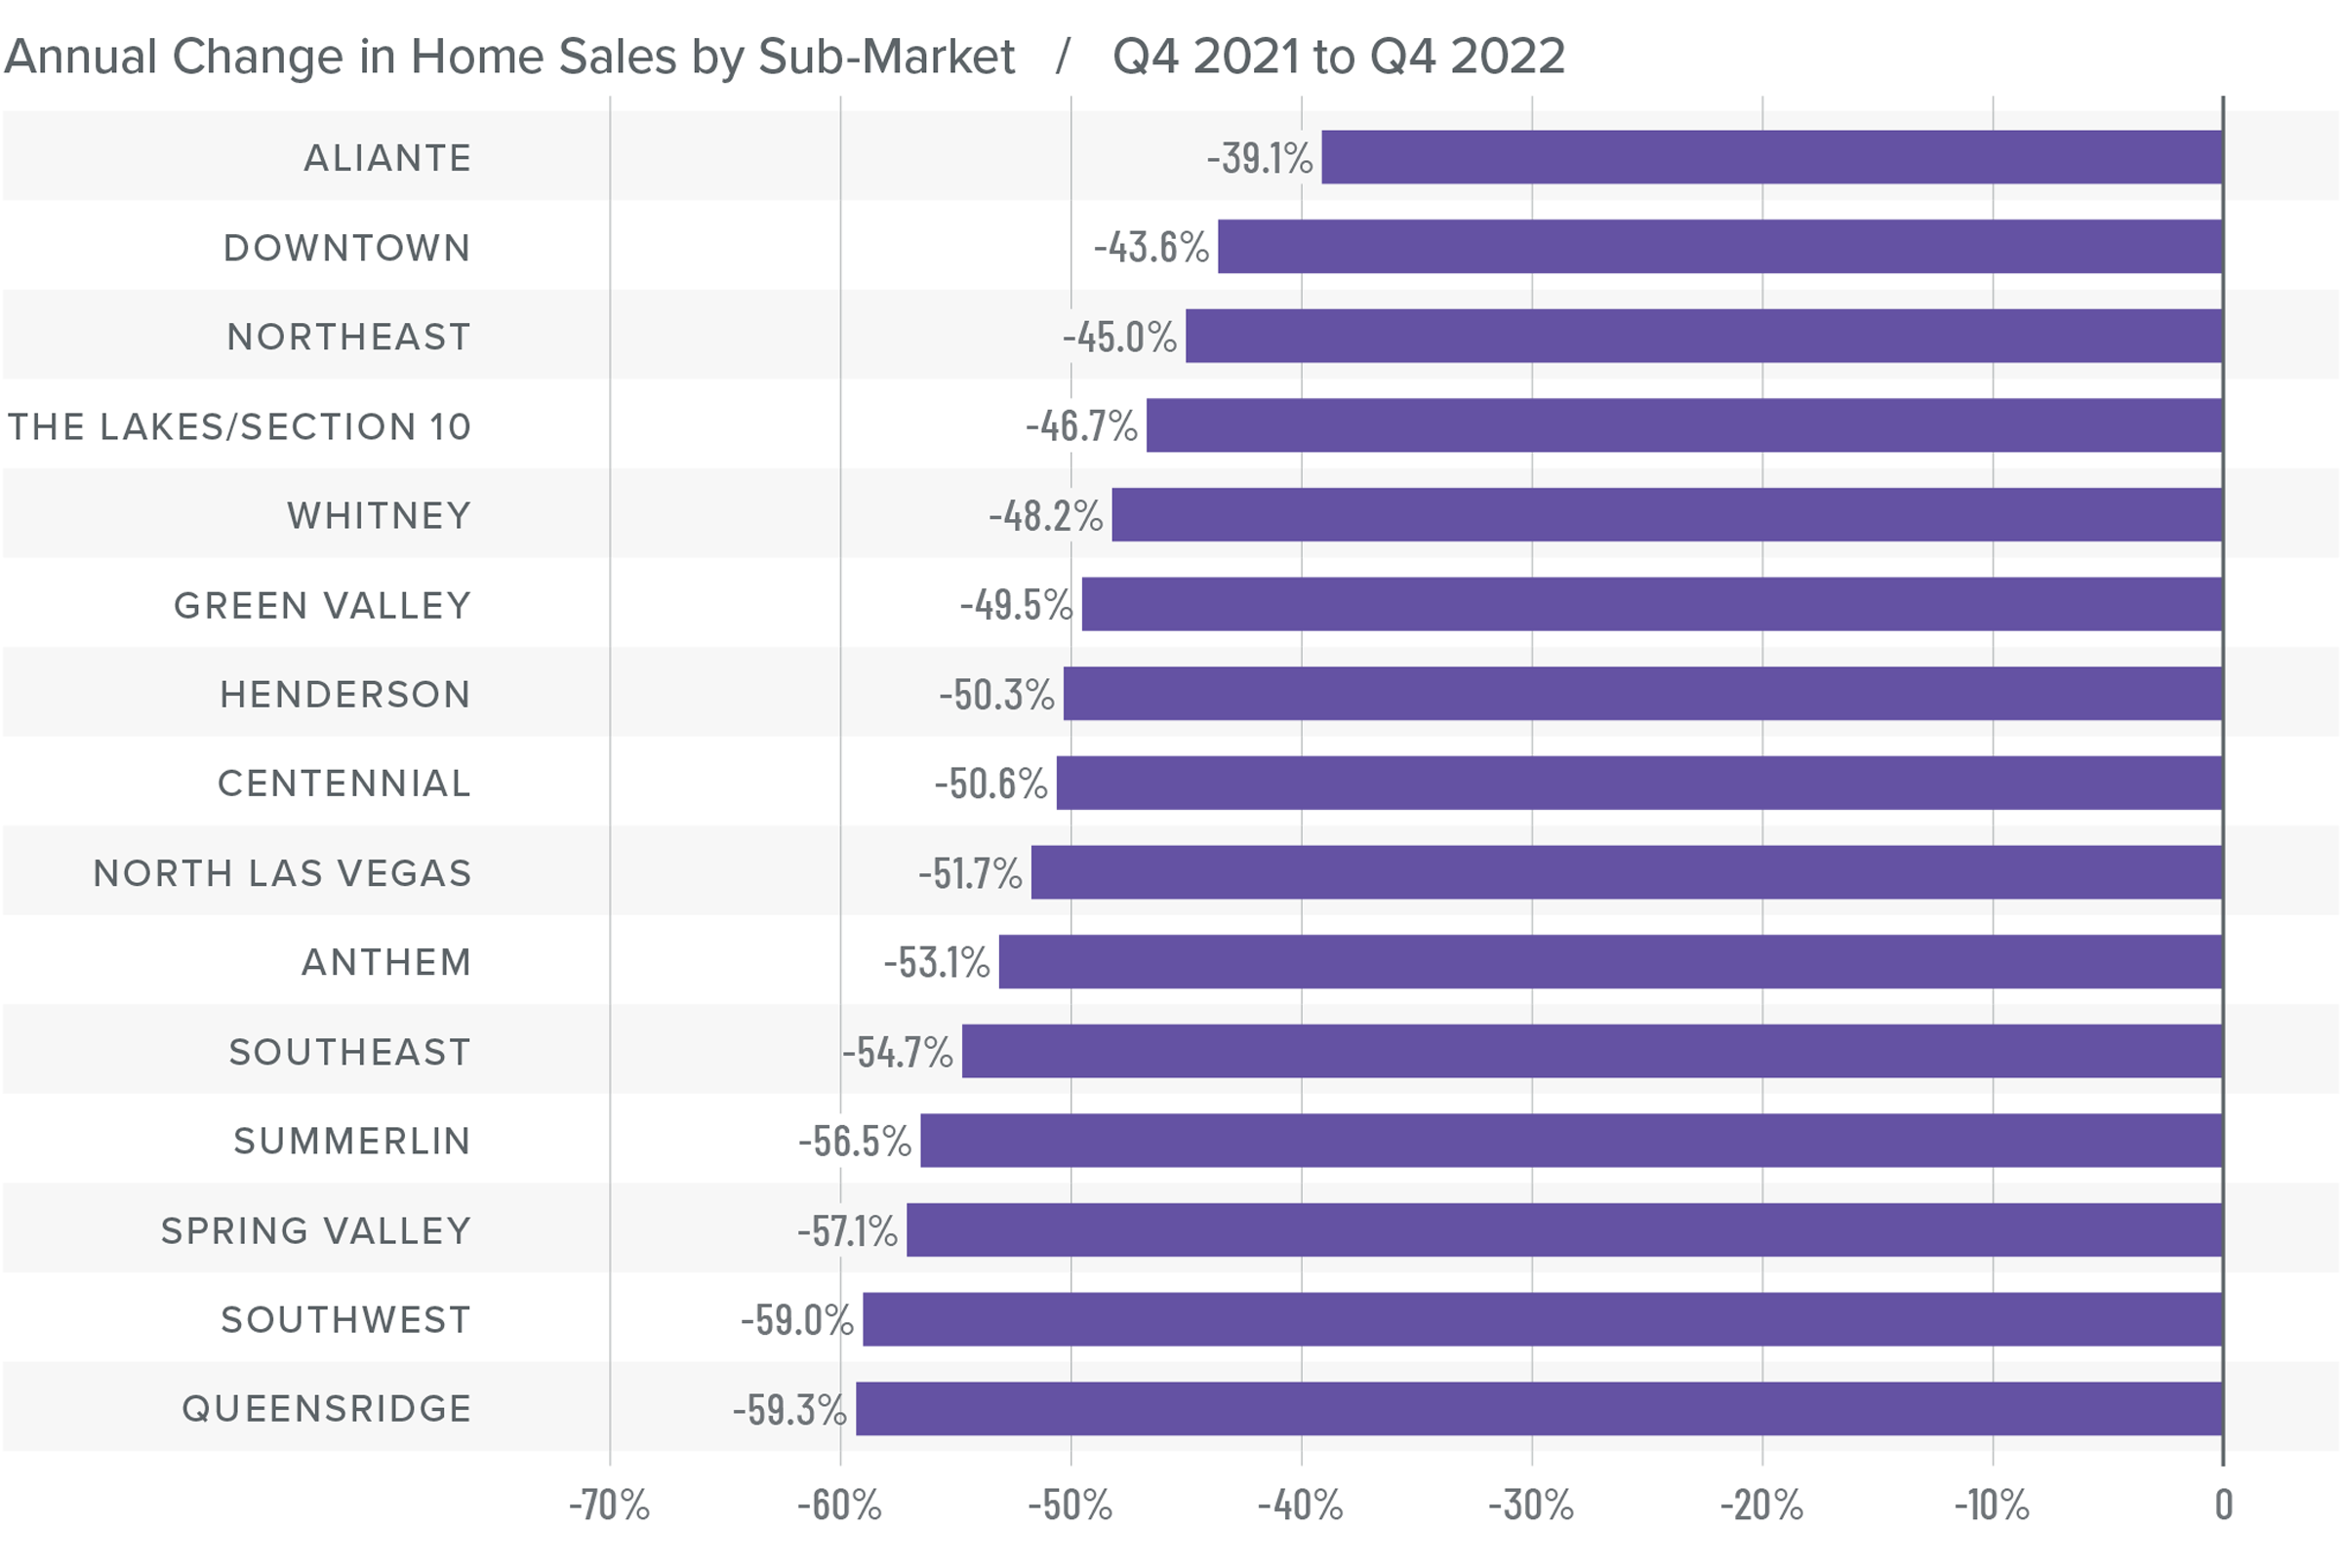 A bar graph showing the annual change in home sales for various sub-markets in Nevada from Q4 2021 to Q4 2022. All sub-markets have a negative percentage year-over-year change. Here are the totals: Aliante at -39.1%, Downtown at -43.6%, Northeast at -45%, The Lakes/Section 10 -46.7%, Whitney -48.2%, Green Valley at -49.5%, Henderson at -50.3%, Centennial at -50.6%, North Las Vegas at -51.7%, Anthem at -53.1, Southeast at -54.7%, Summerlin at -56.5%, Spring Valley at -57.1%, Southwest at -59%, and Queensridge at -59.3%.